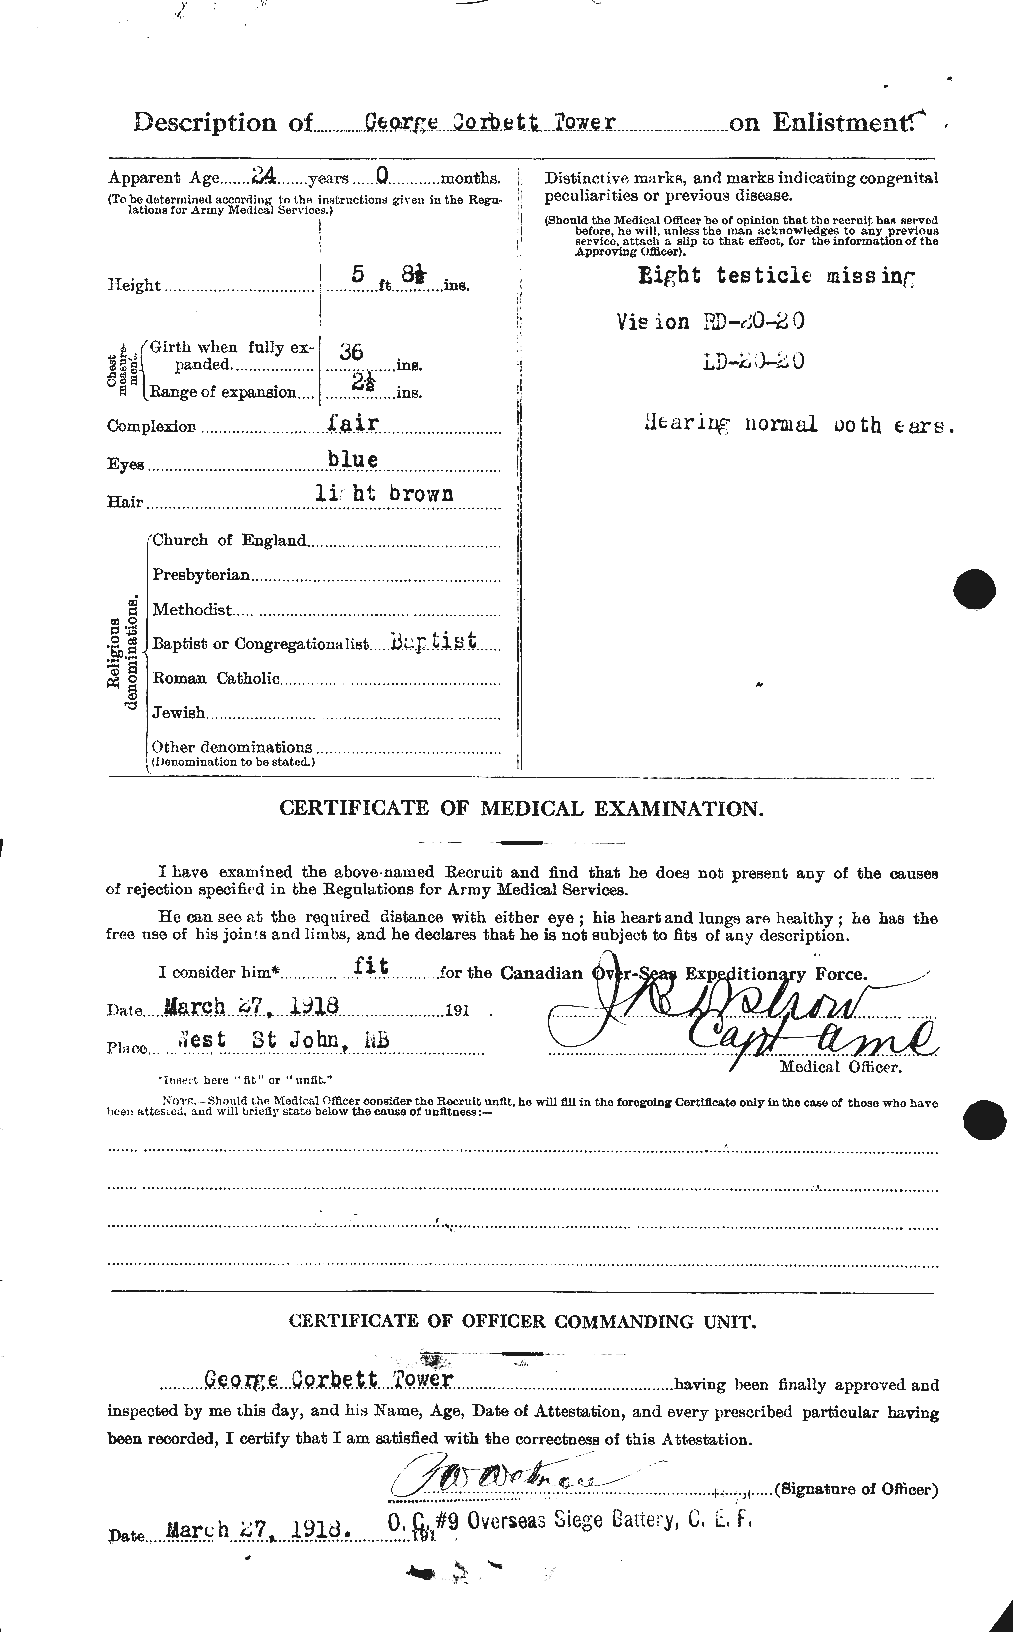 Personnel Records of the First World War - CEF 636192b